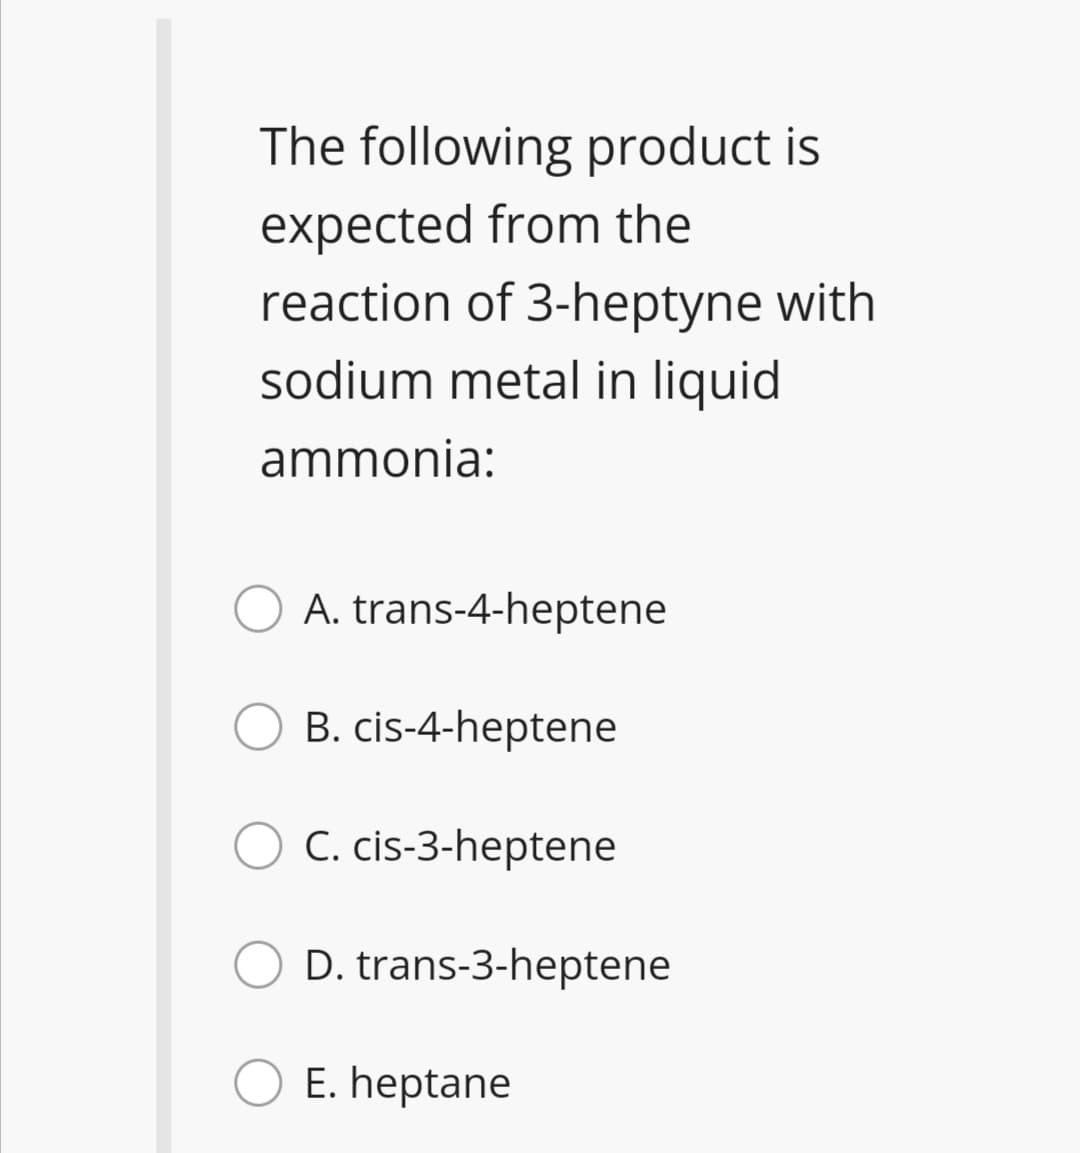 The following product is
expected from the
reaction of 3-heptyne with
sodium metal in liquid
ammonia:
A. trans-4-heptene
B. cis-4-heptene
C. cis-3-heptene
D. trans-3-heptene
E. heptane
